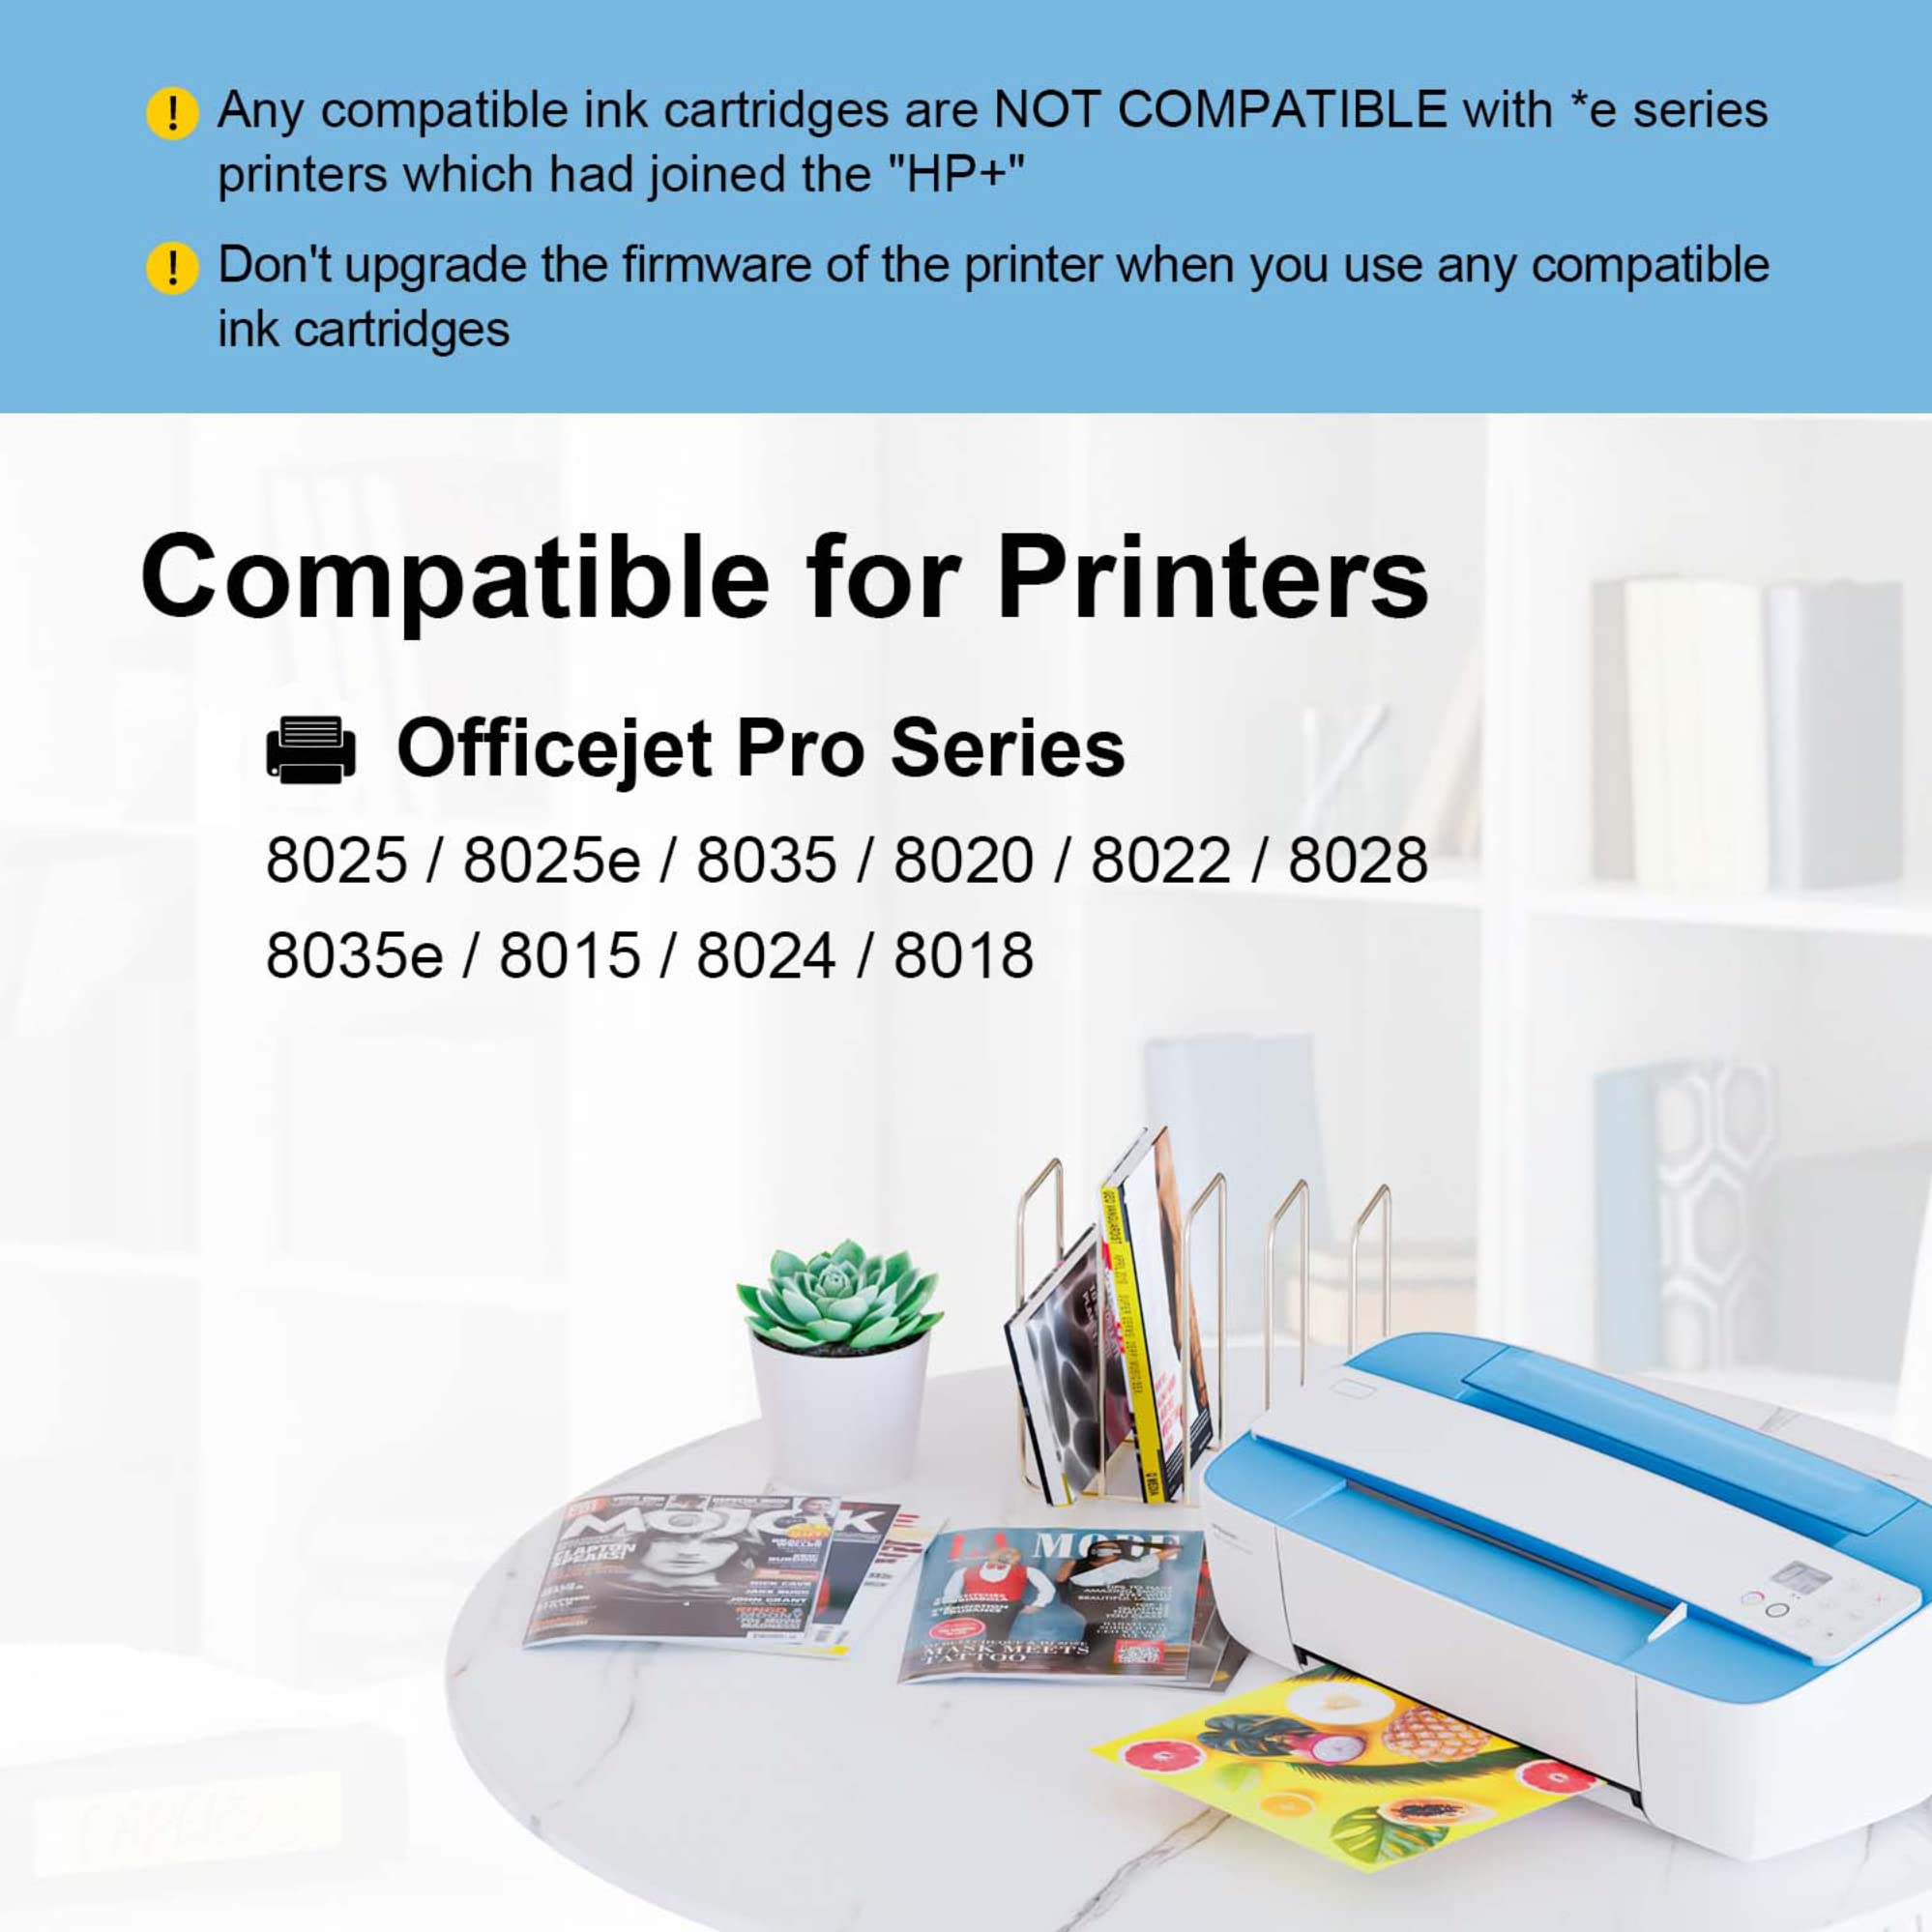 FASTINK Compatible with HP 910XL 910 XL Ink Cartridges for 8025e 8025 8020 8035e 8035 8022 8028 (Not for *e Printer with HP+ Service), 5Pack